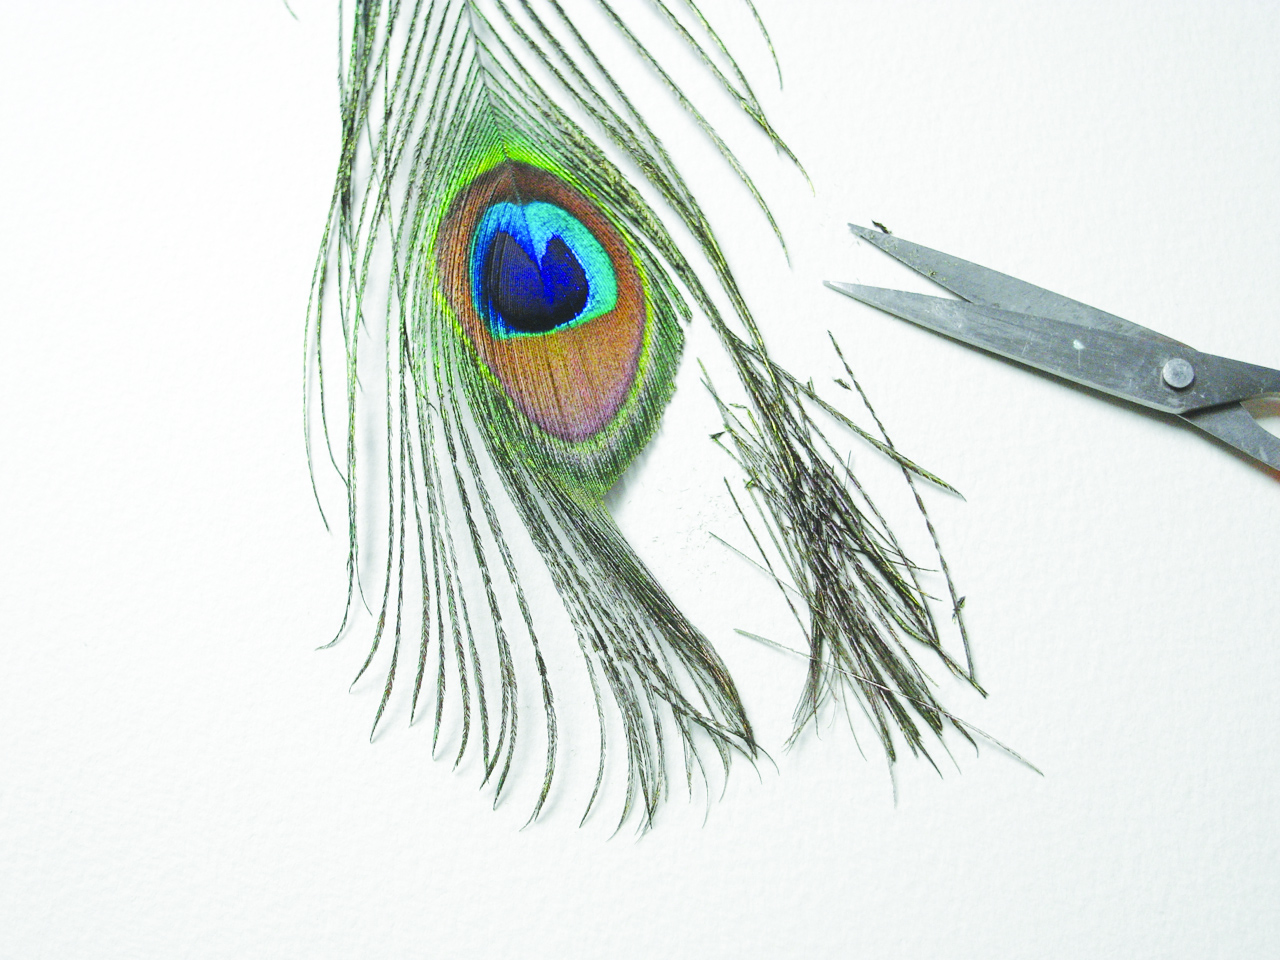 Drawing Peacock Feather, HD Png Download , Transparent Png Image - PNGitem